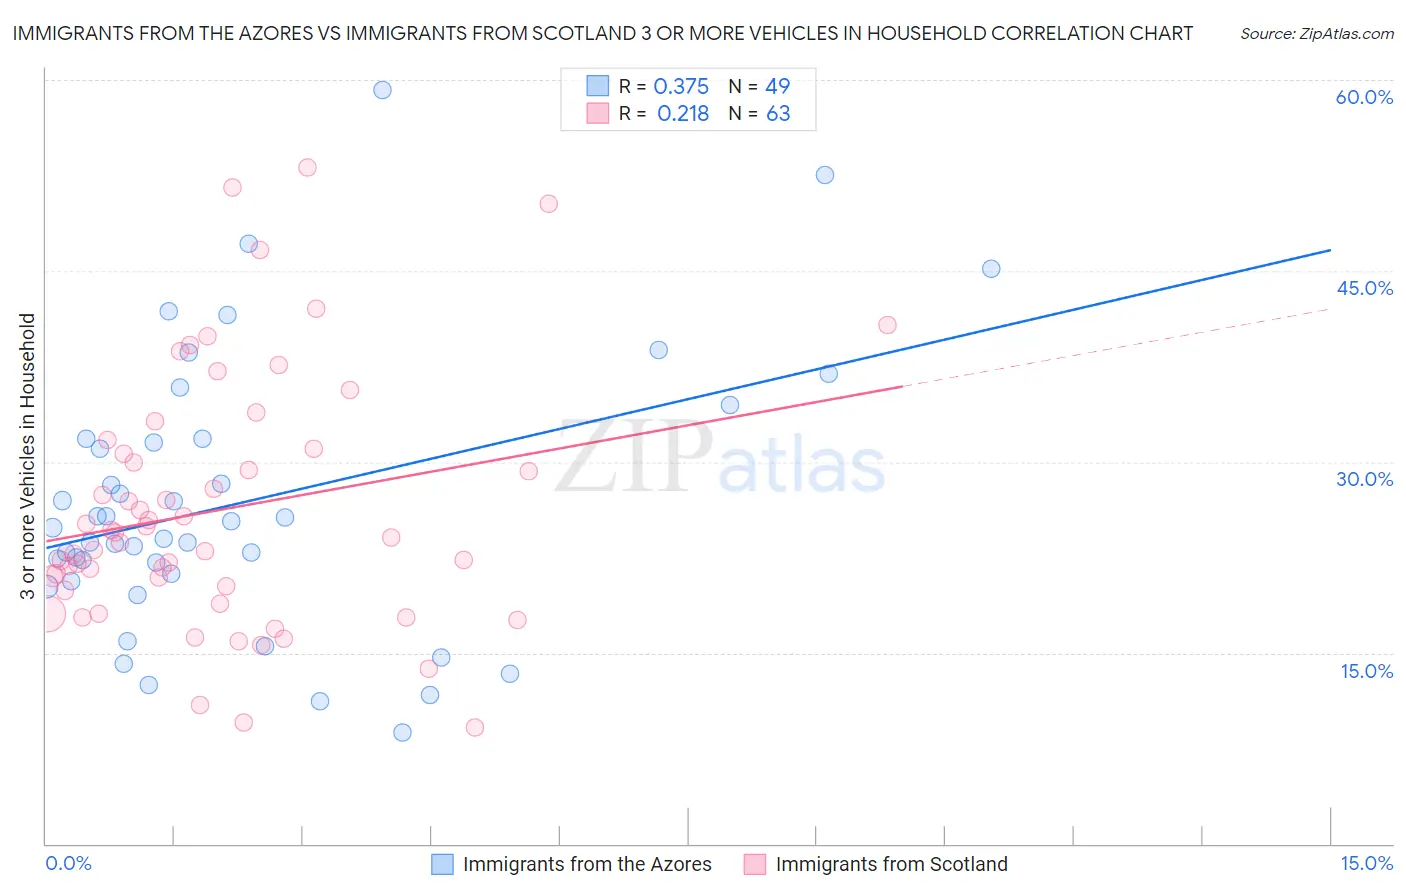 Immigrants from the Azores vs Immigrants from Scotland 3 or more Vehicles in Household